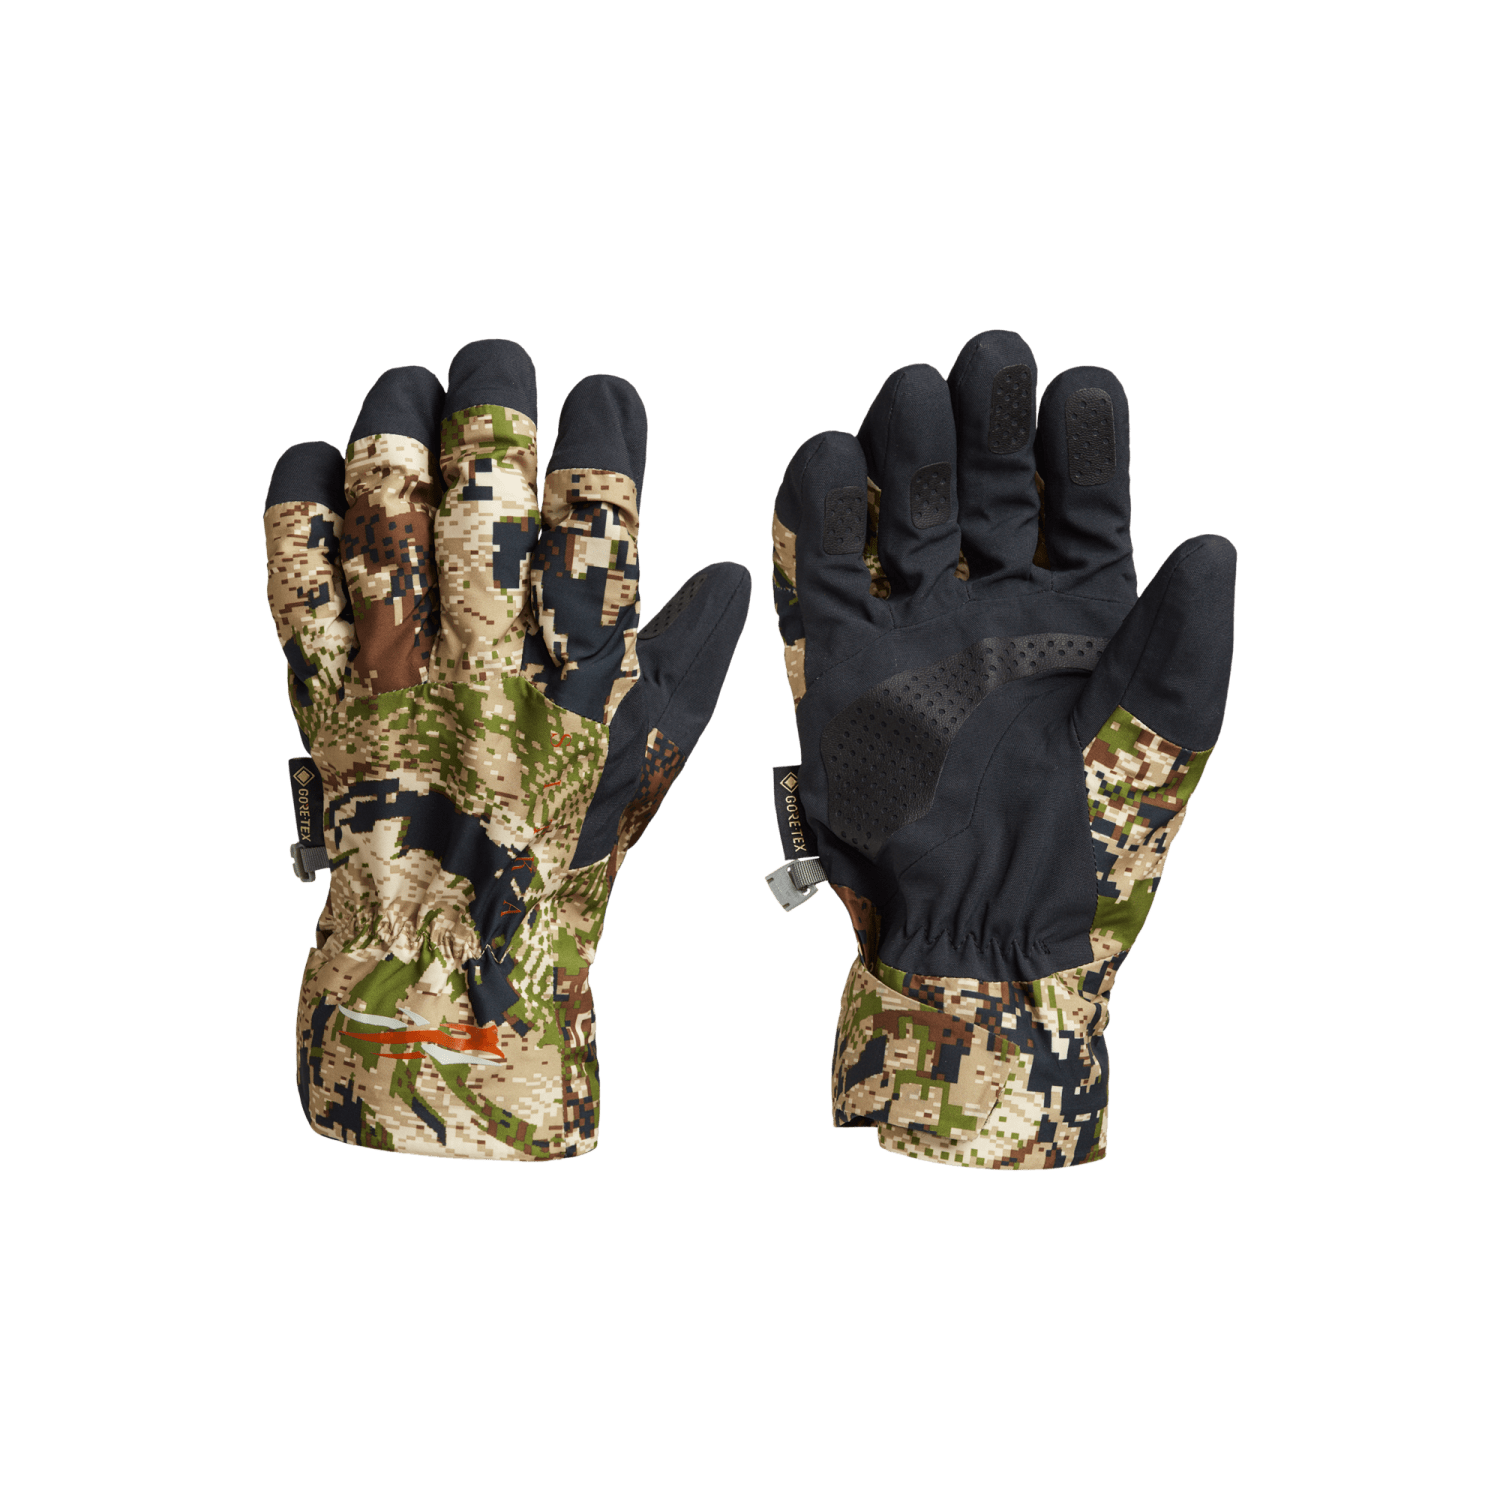 SteepGear Gloves: Superior Grip and Protection